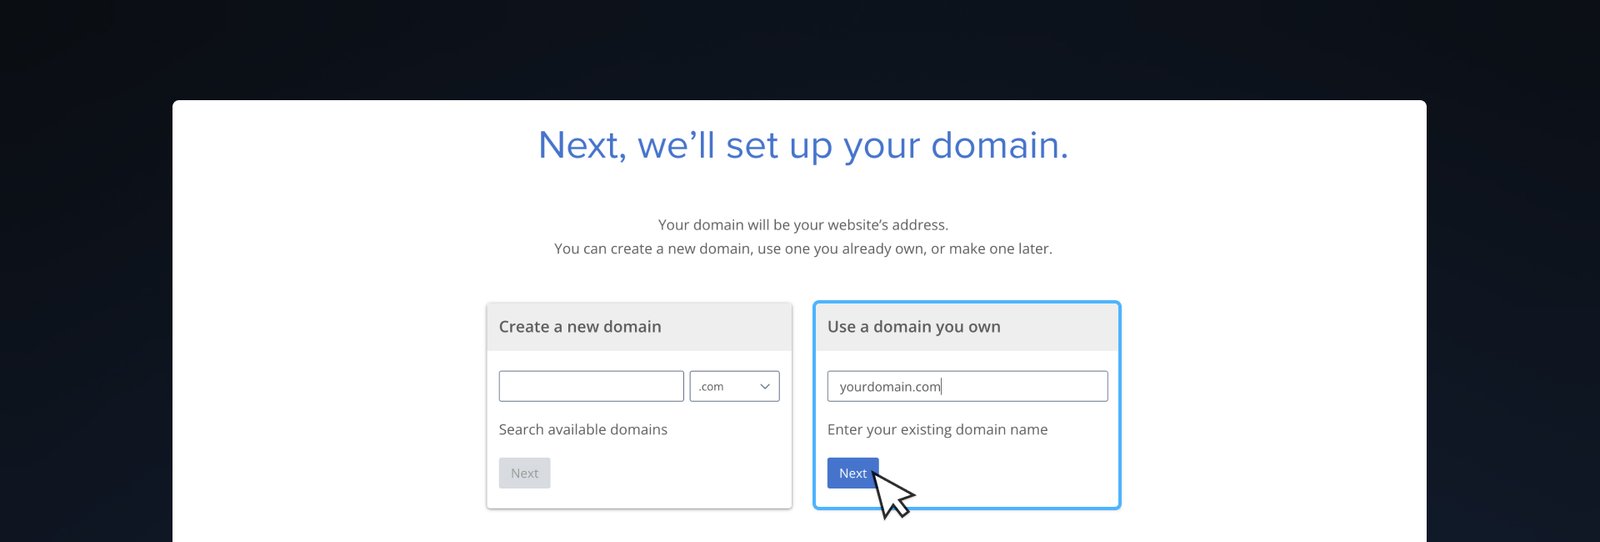 Using already owned domain Bluehost